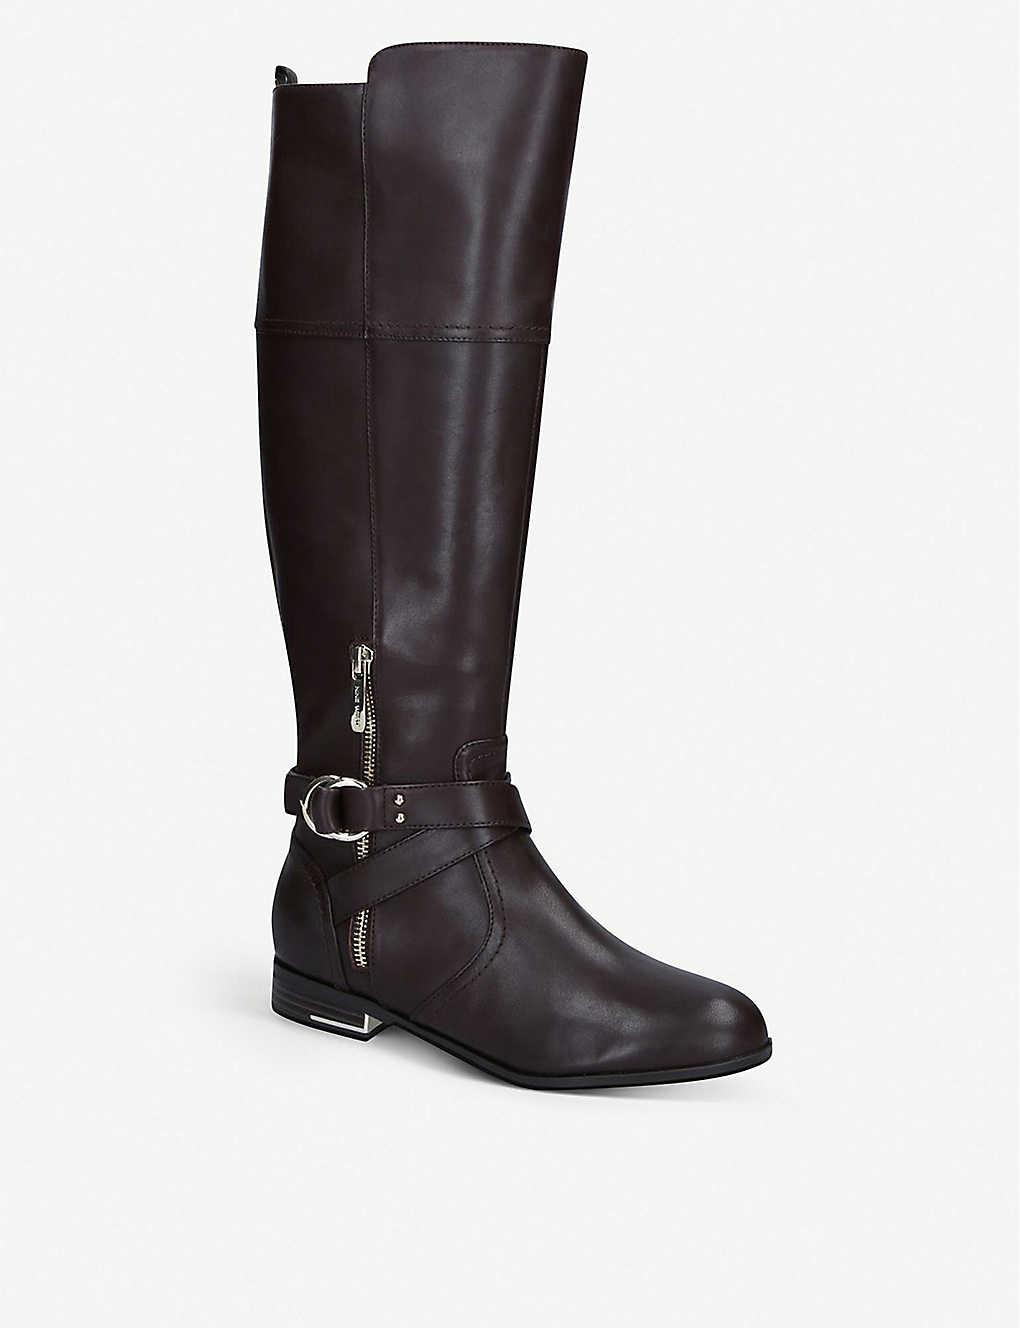 Nine West Linore Mid-calf Leather Boots in Brown | Lyst